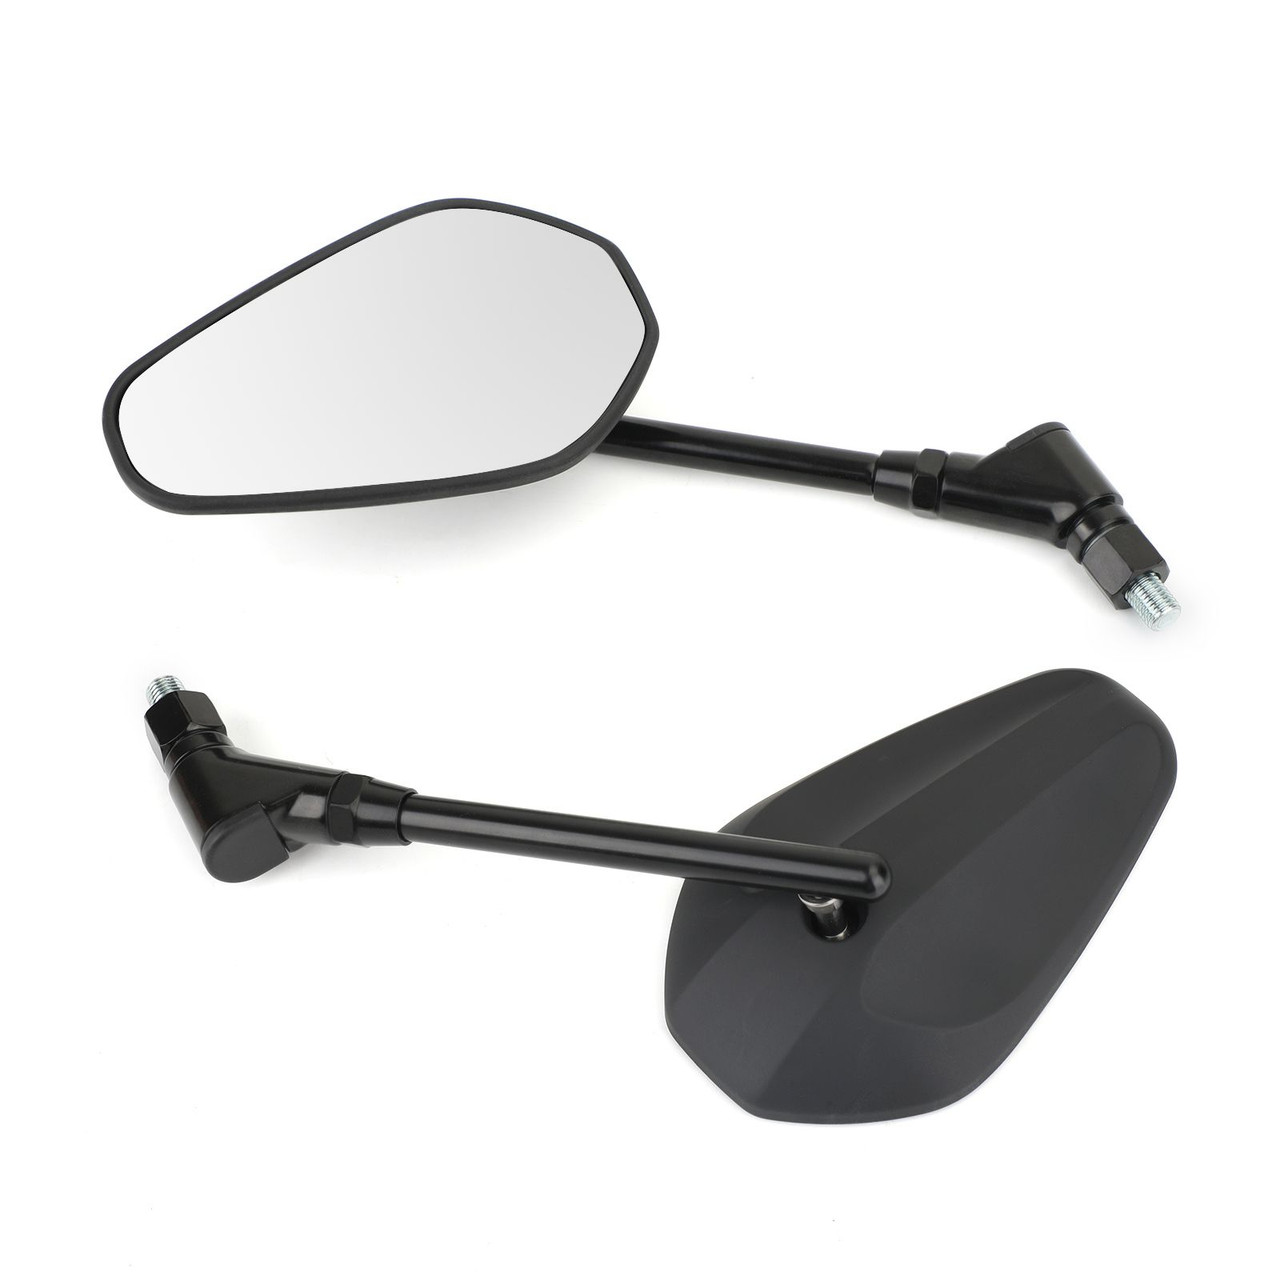 Pair M10x1.25 Stainless Steel Stem Rearview Side Mirrors Fit for Motorcycle Moped Scooter Quad ATV UNIVERSAL Black